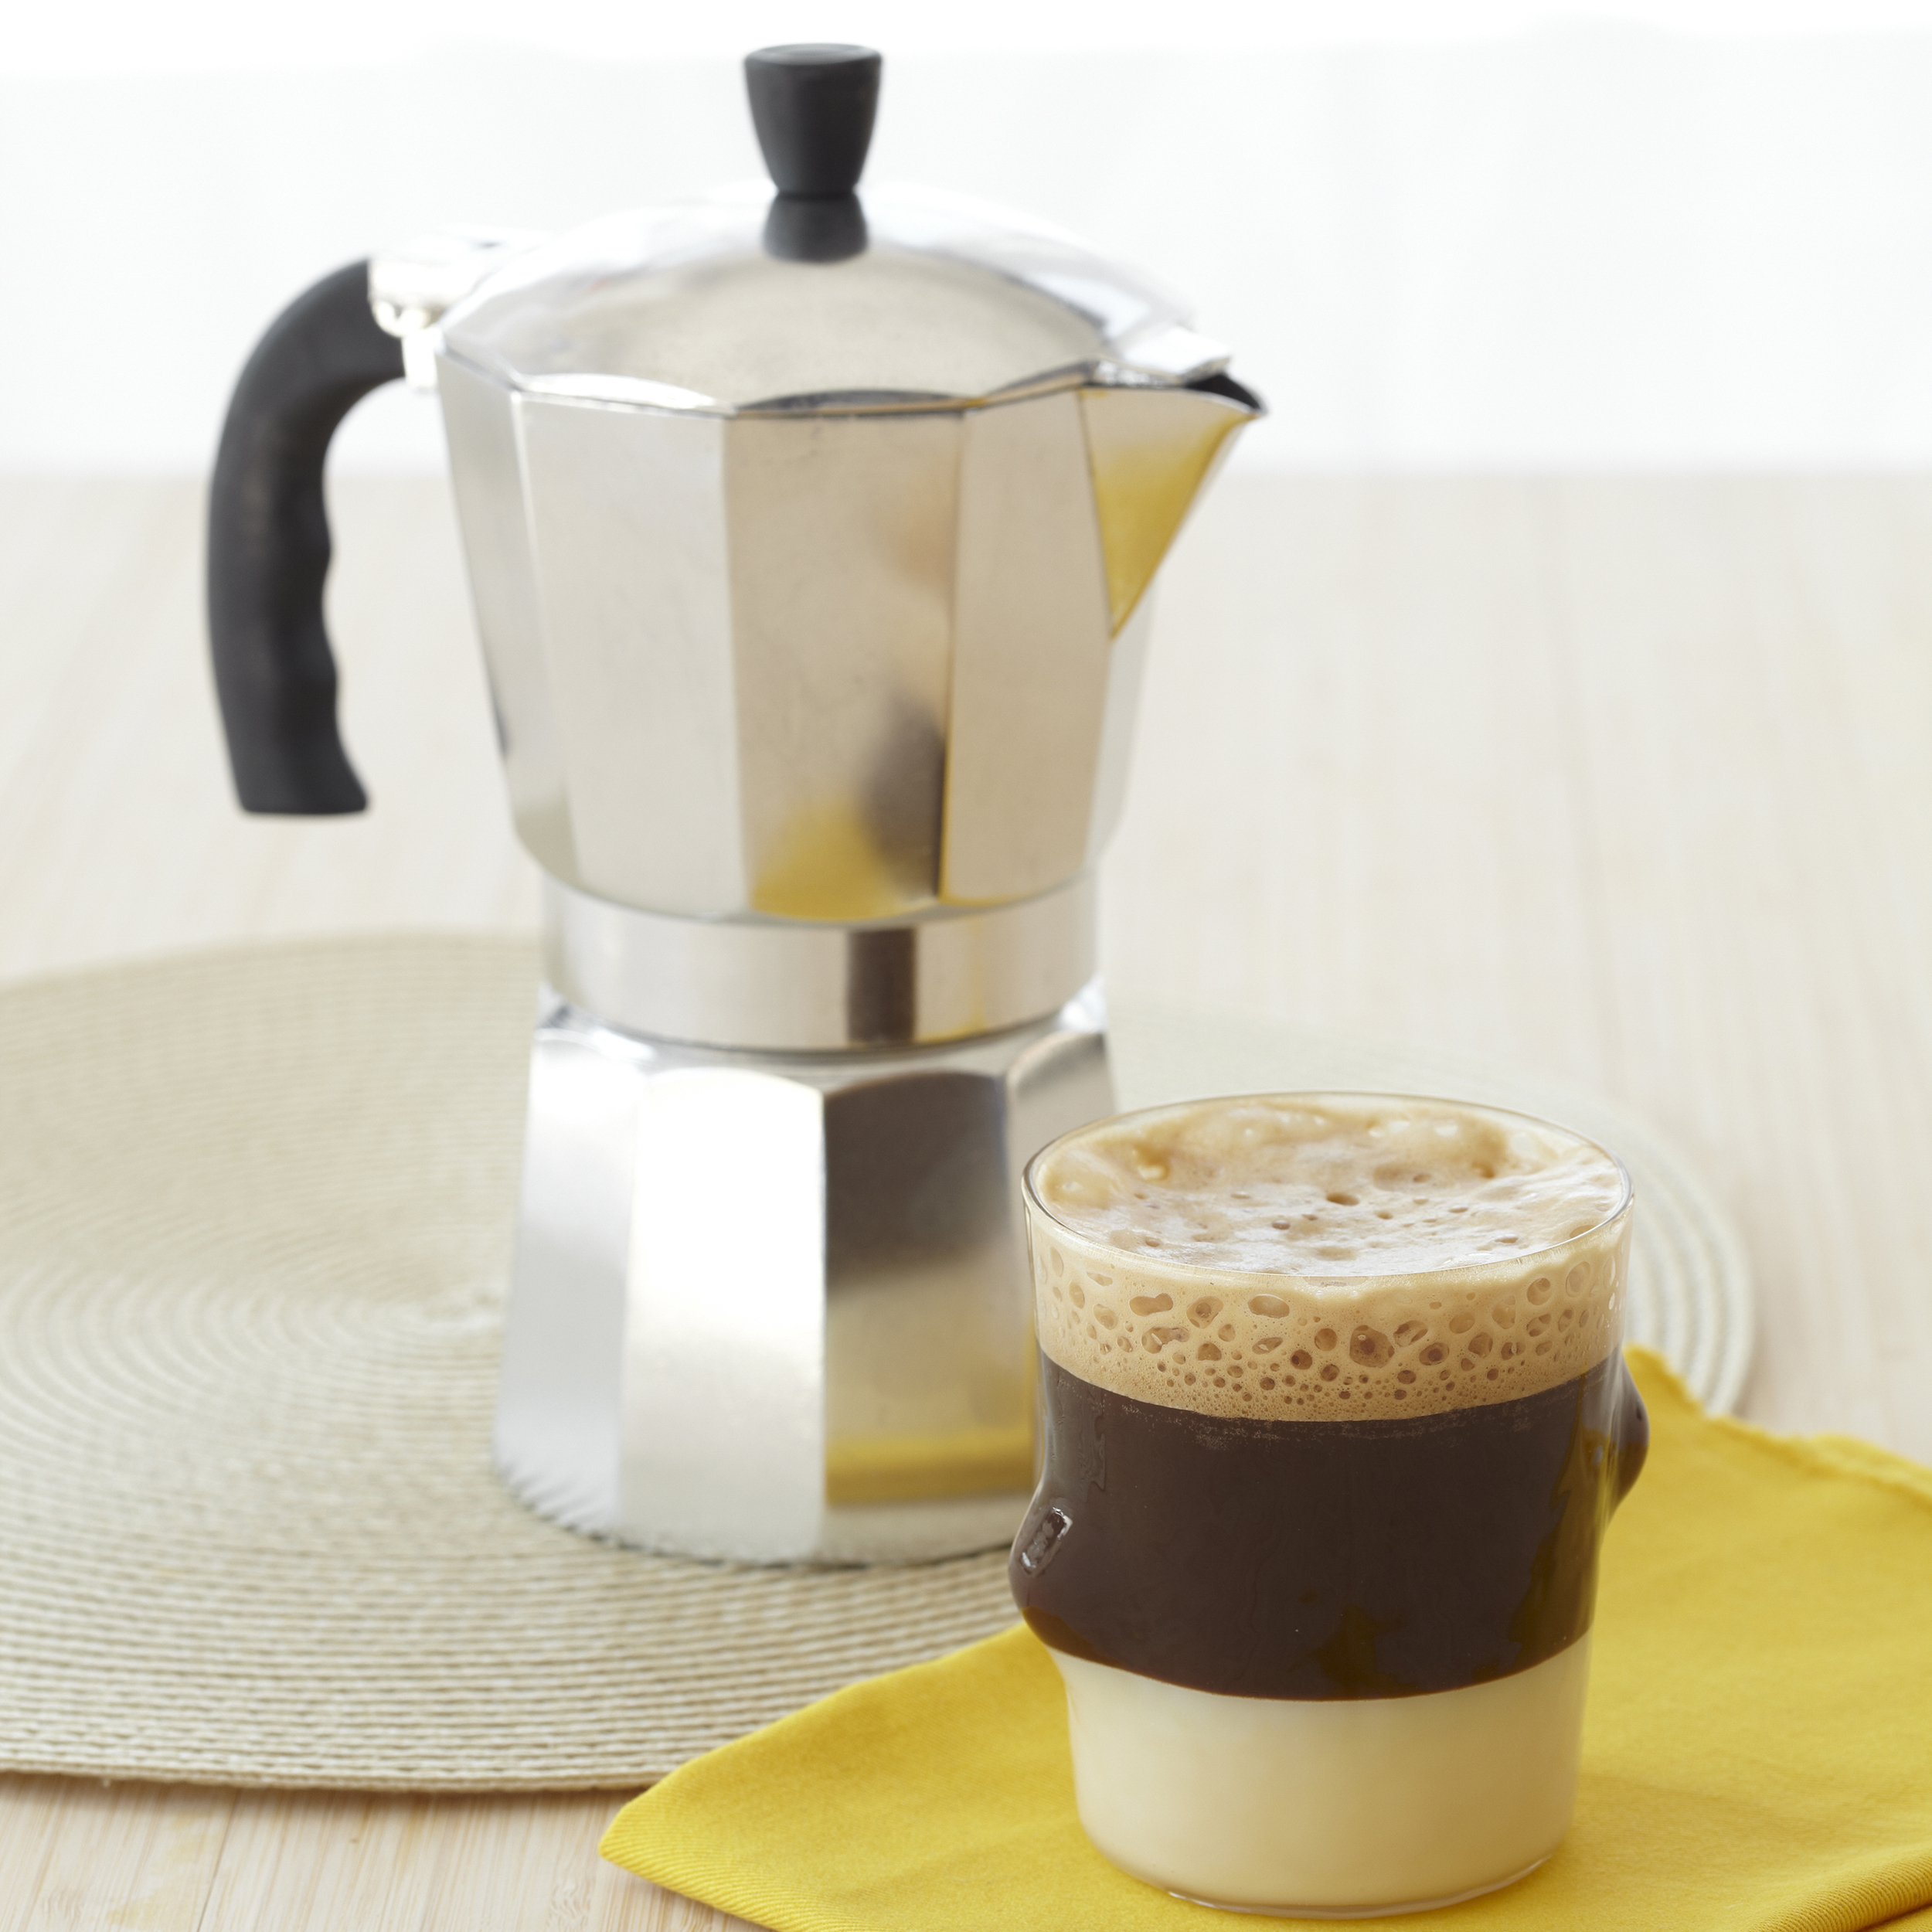 IMUSA Coffee Makers at